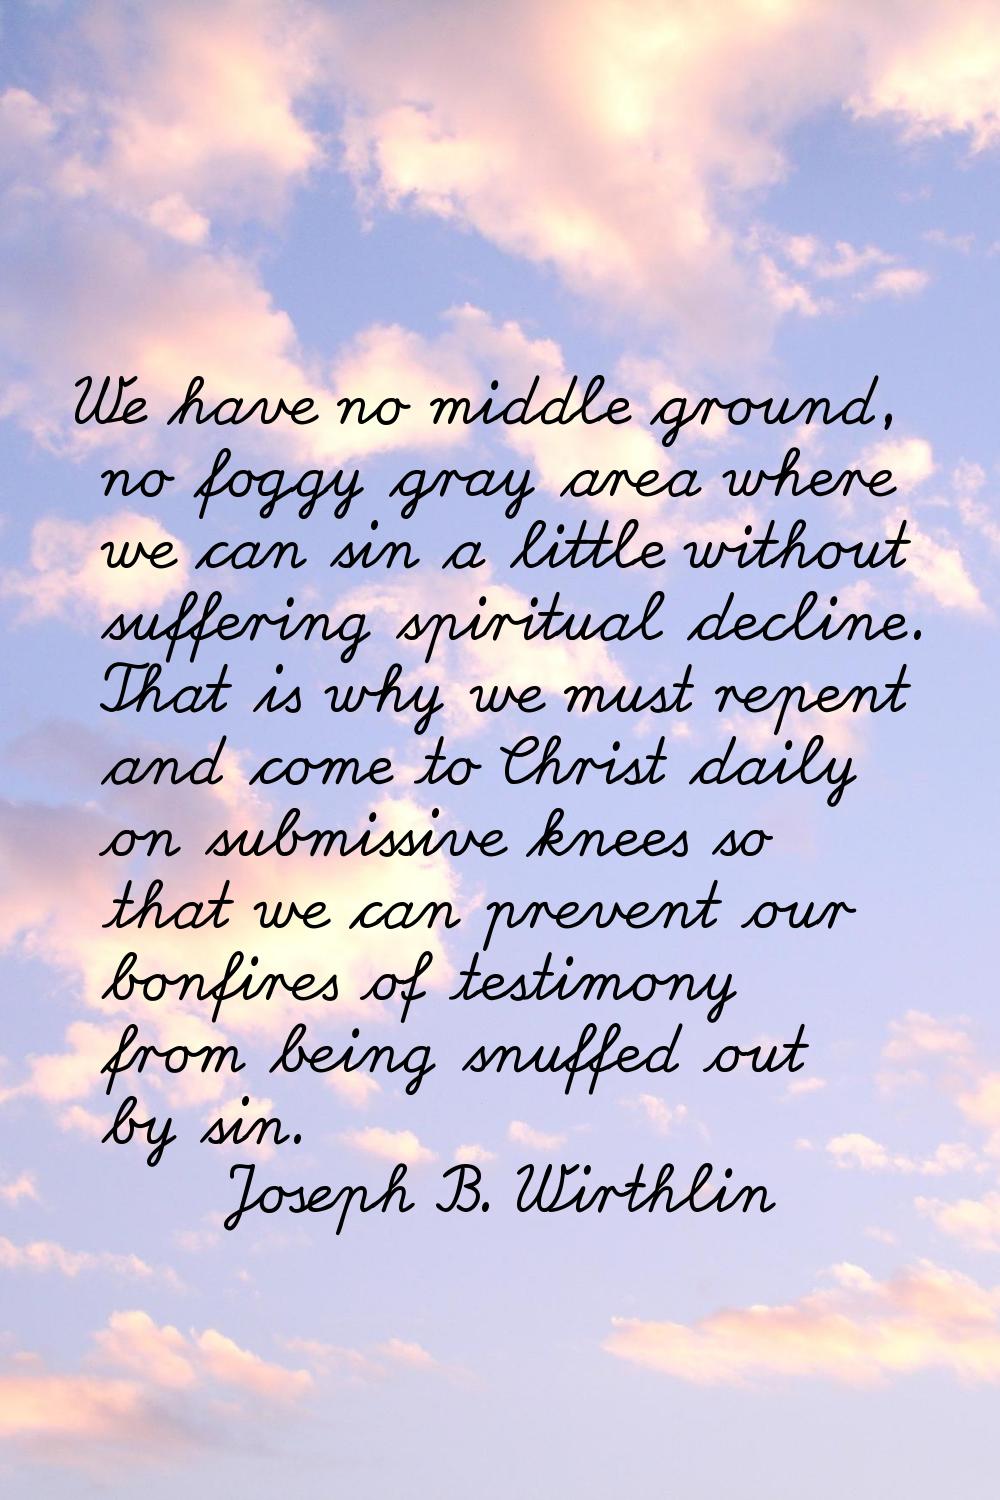 We have no middle ground, no foggy gray area where we can sin a little without suffering spiritual 